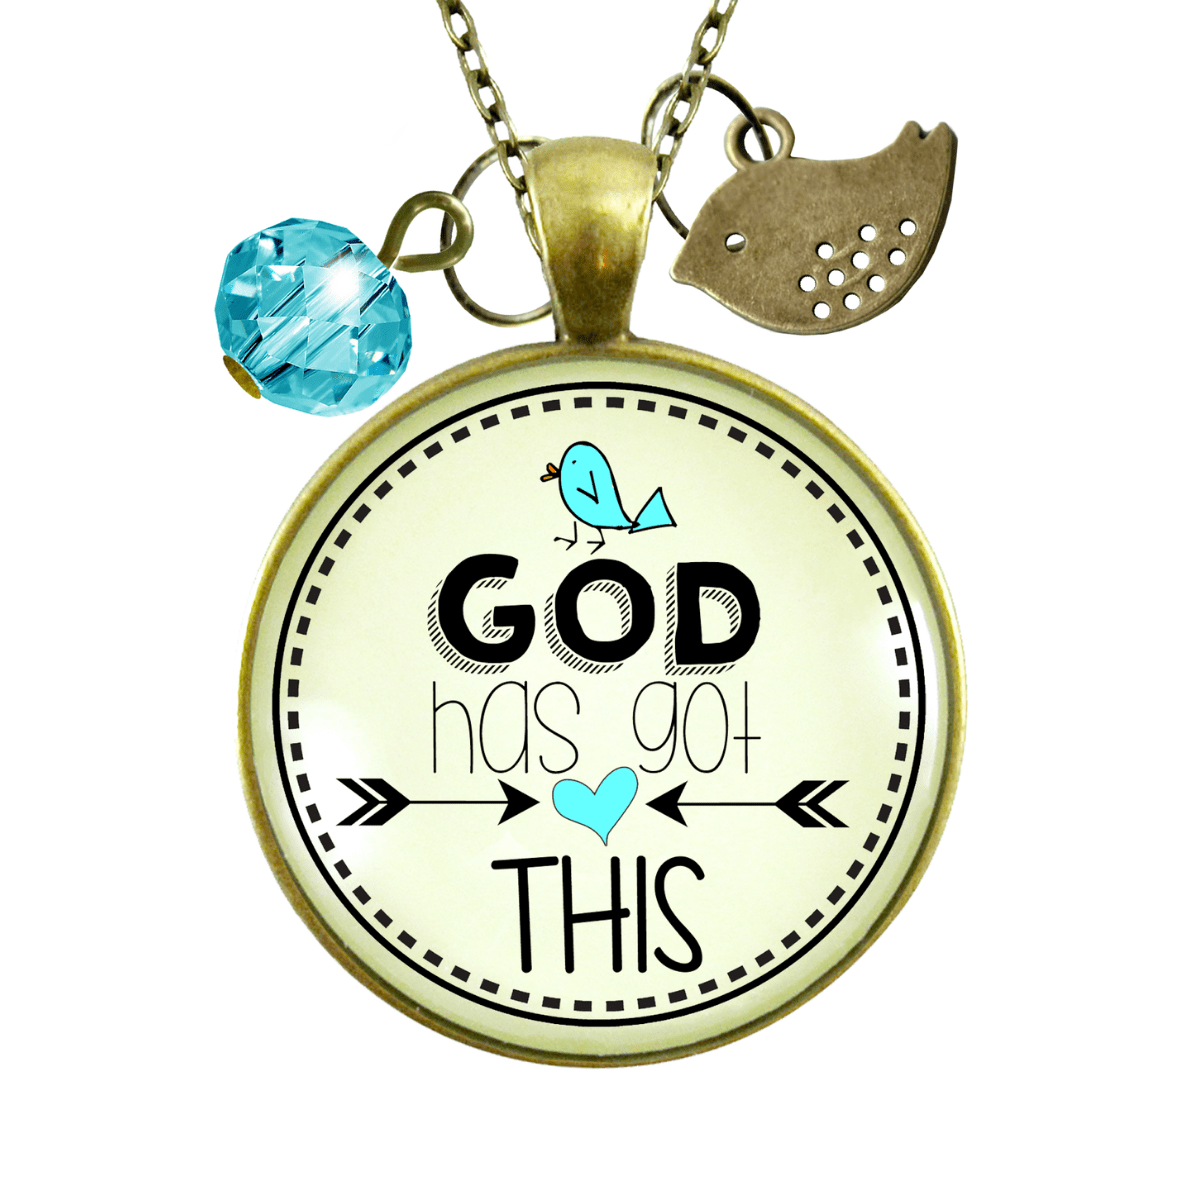 Gutsy Goodness He Has Got This Faith Inspired Jewelry Vintage Style Pendant Bird Charm - Gutsy Goodness Handmade Jewelry;He Has Got This Faith Inspired Jewelry Vintage Style Pendant Bird Charm - Gutsy Goodness Handmade Jewelry Gifts